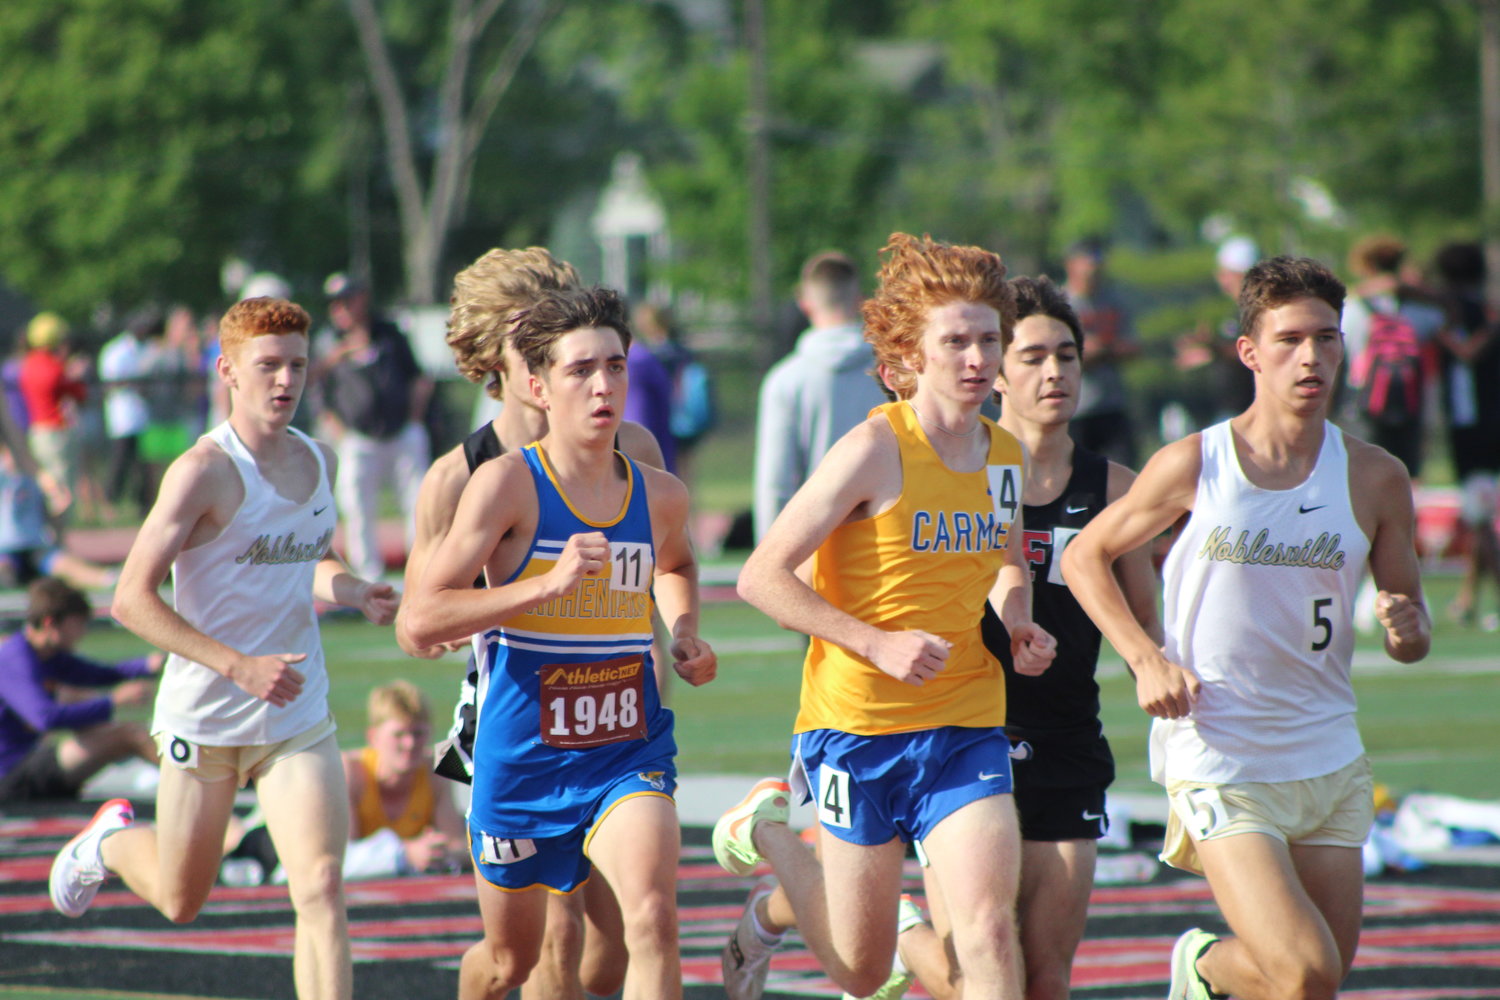 Miller set the school record for CHS at the Sagamore Conference meet earlier this season.